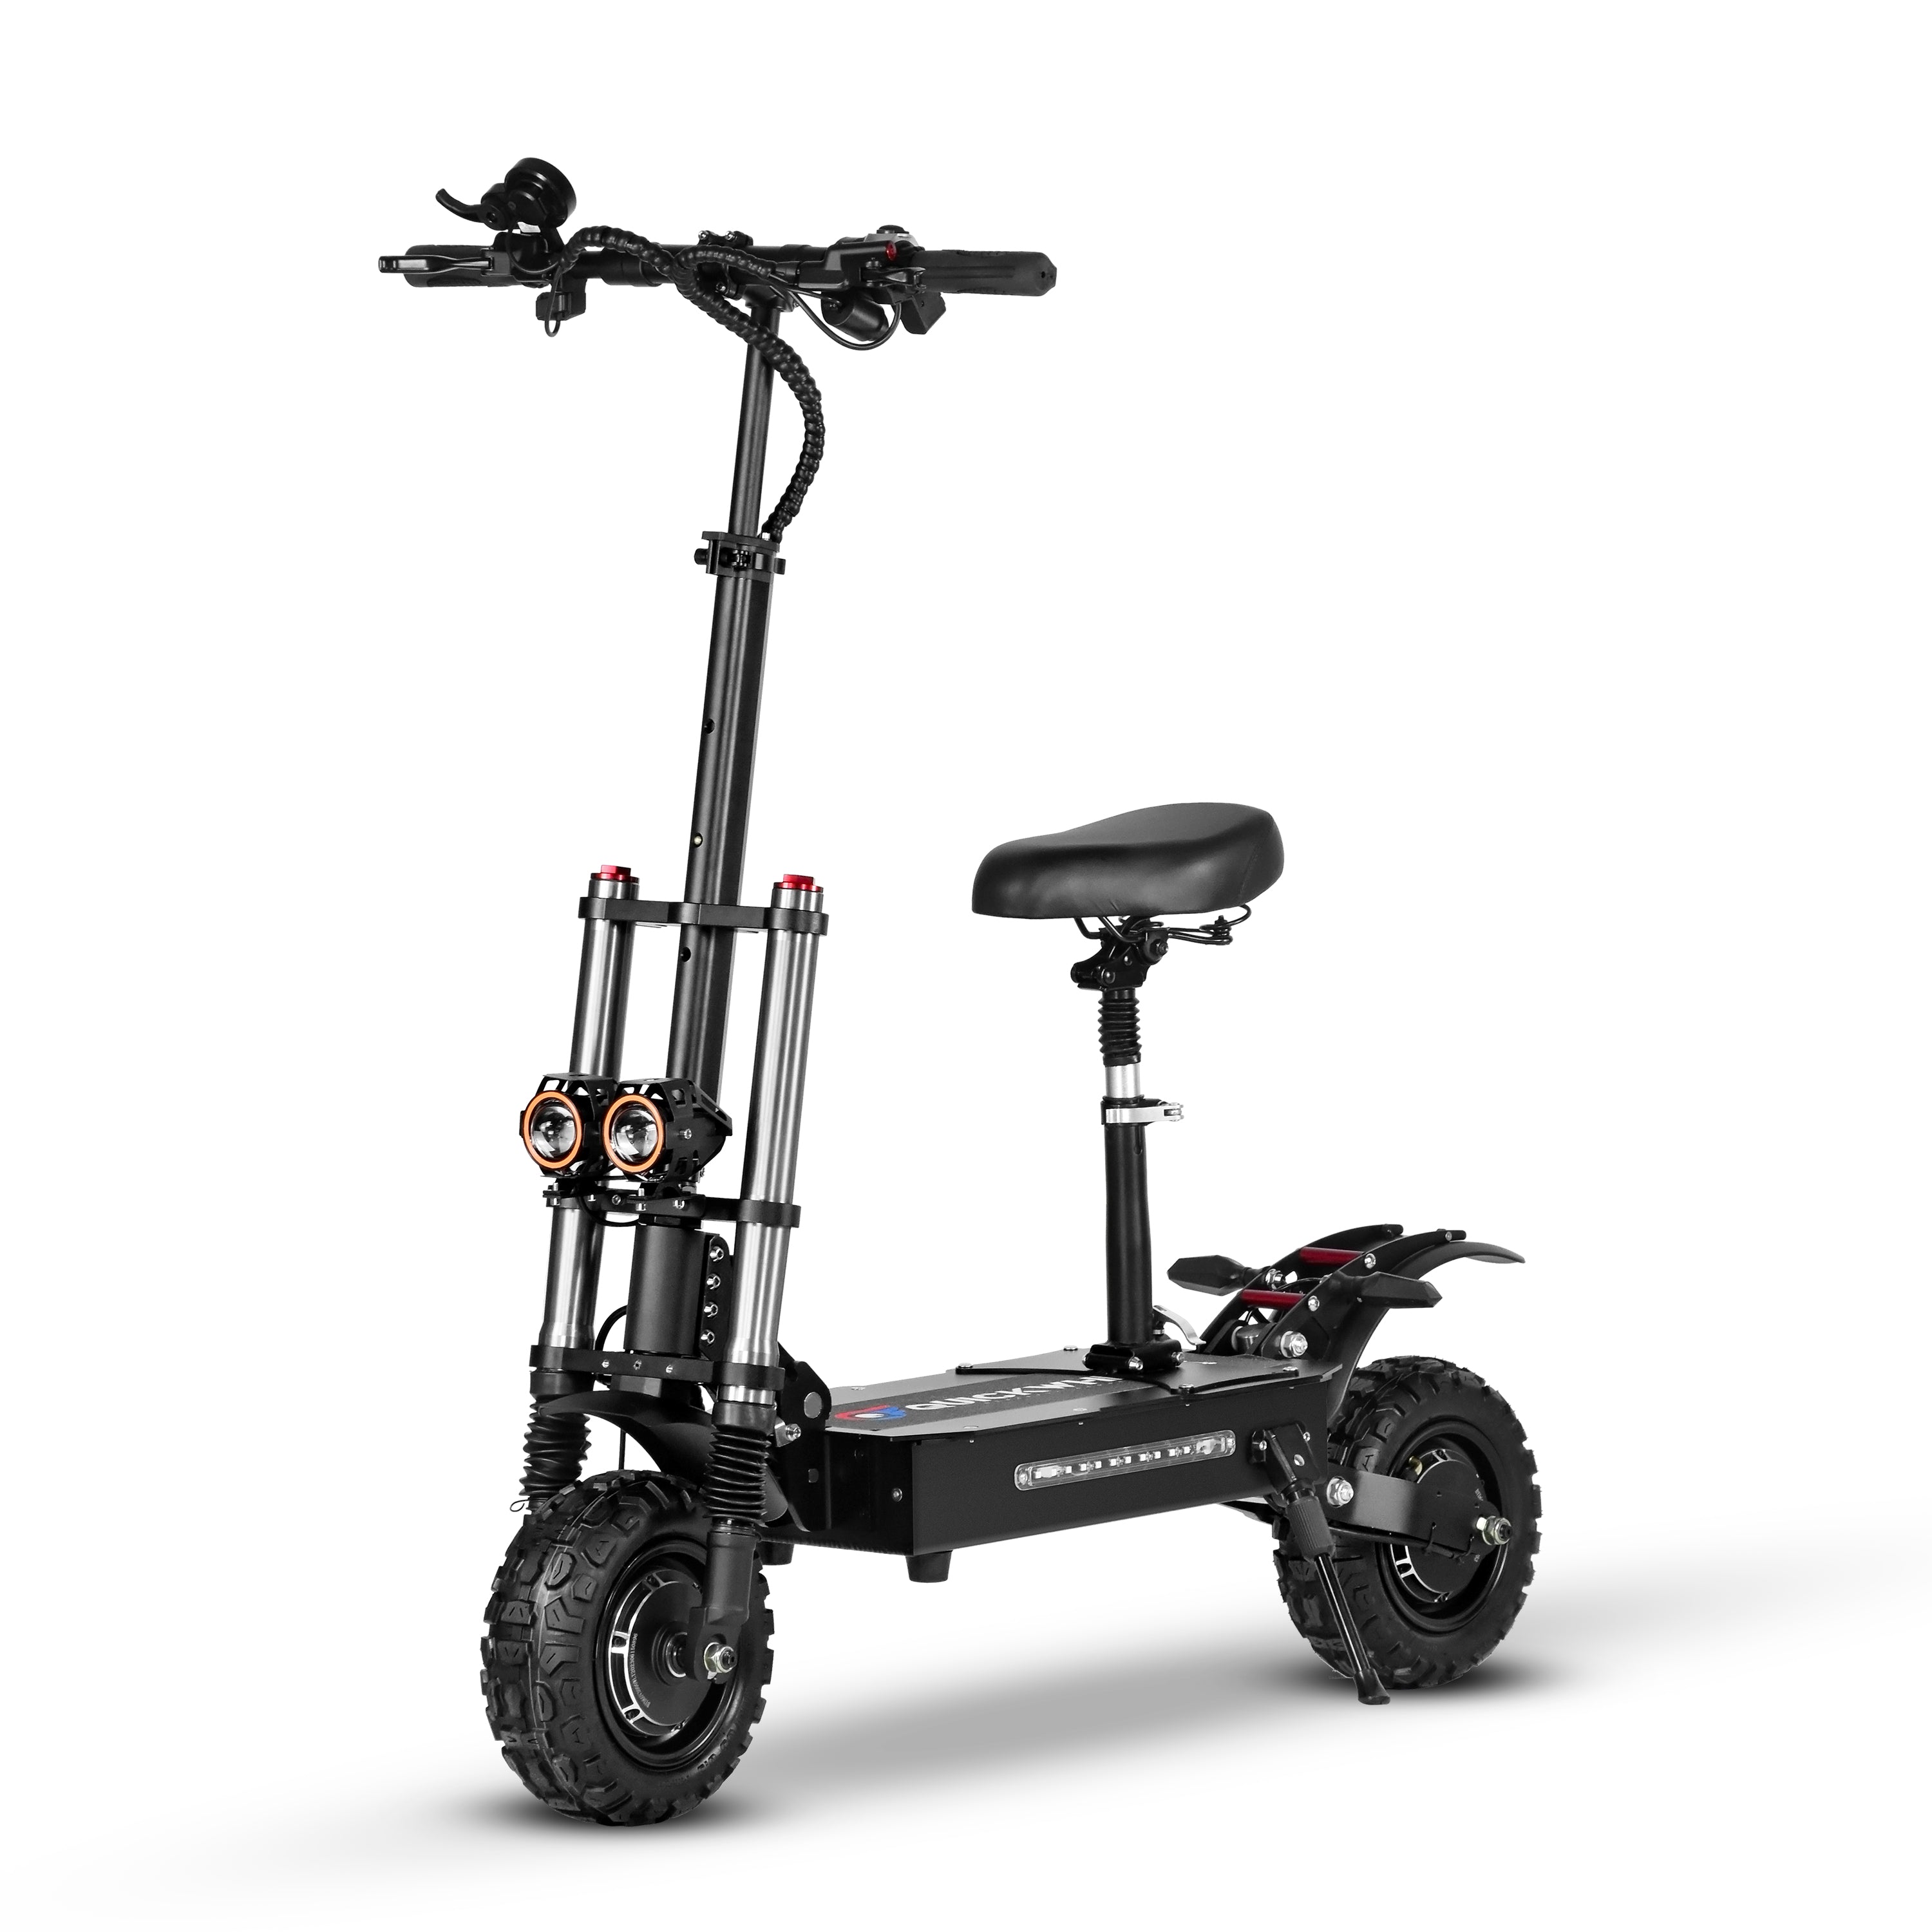 EXPLORER off Road Electric Scooter Motor 6000w, 60v 38.4ah battery, max speed 50-62mph, max range 68 miles.